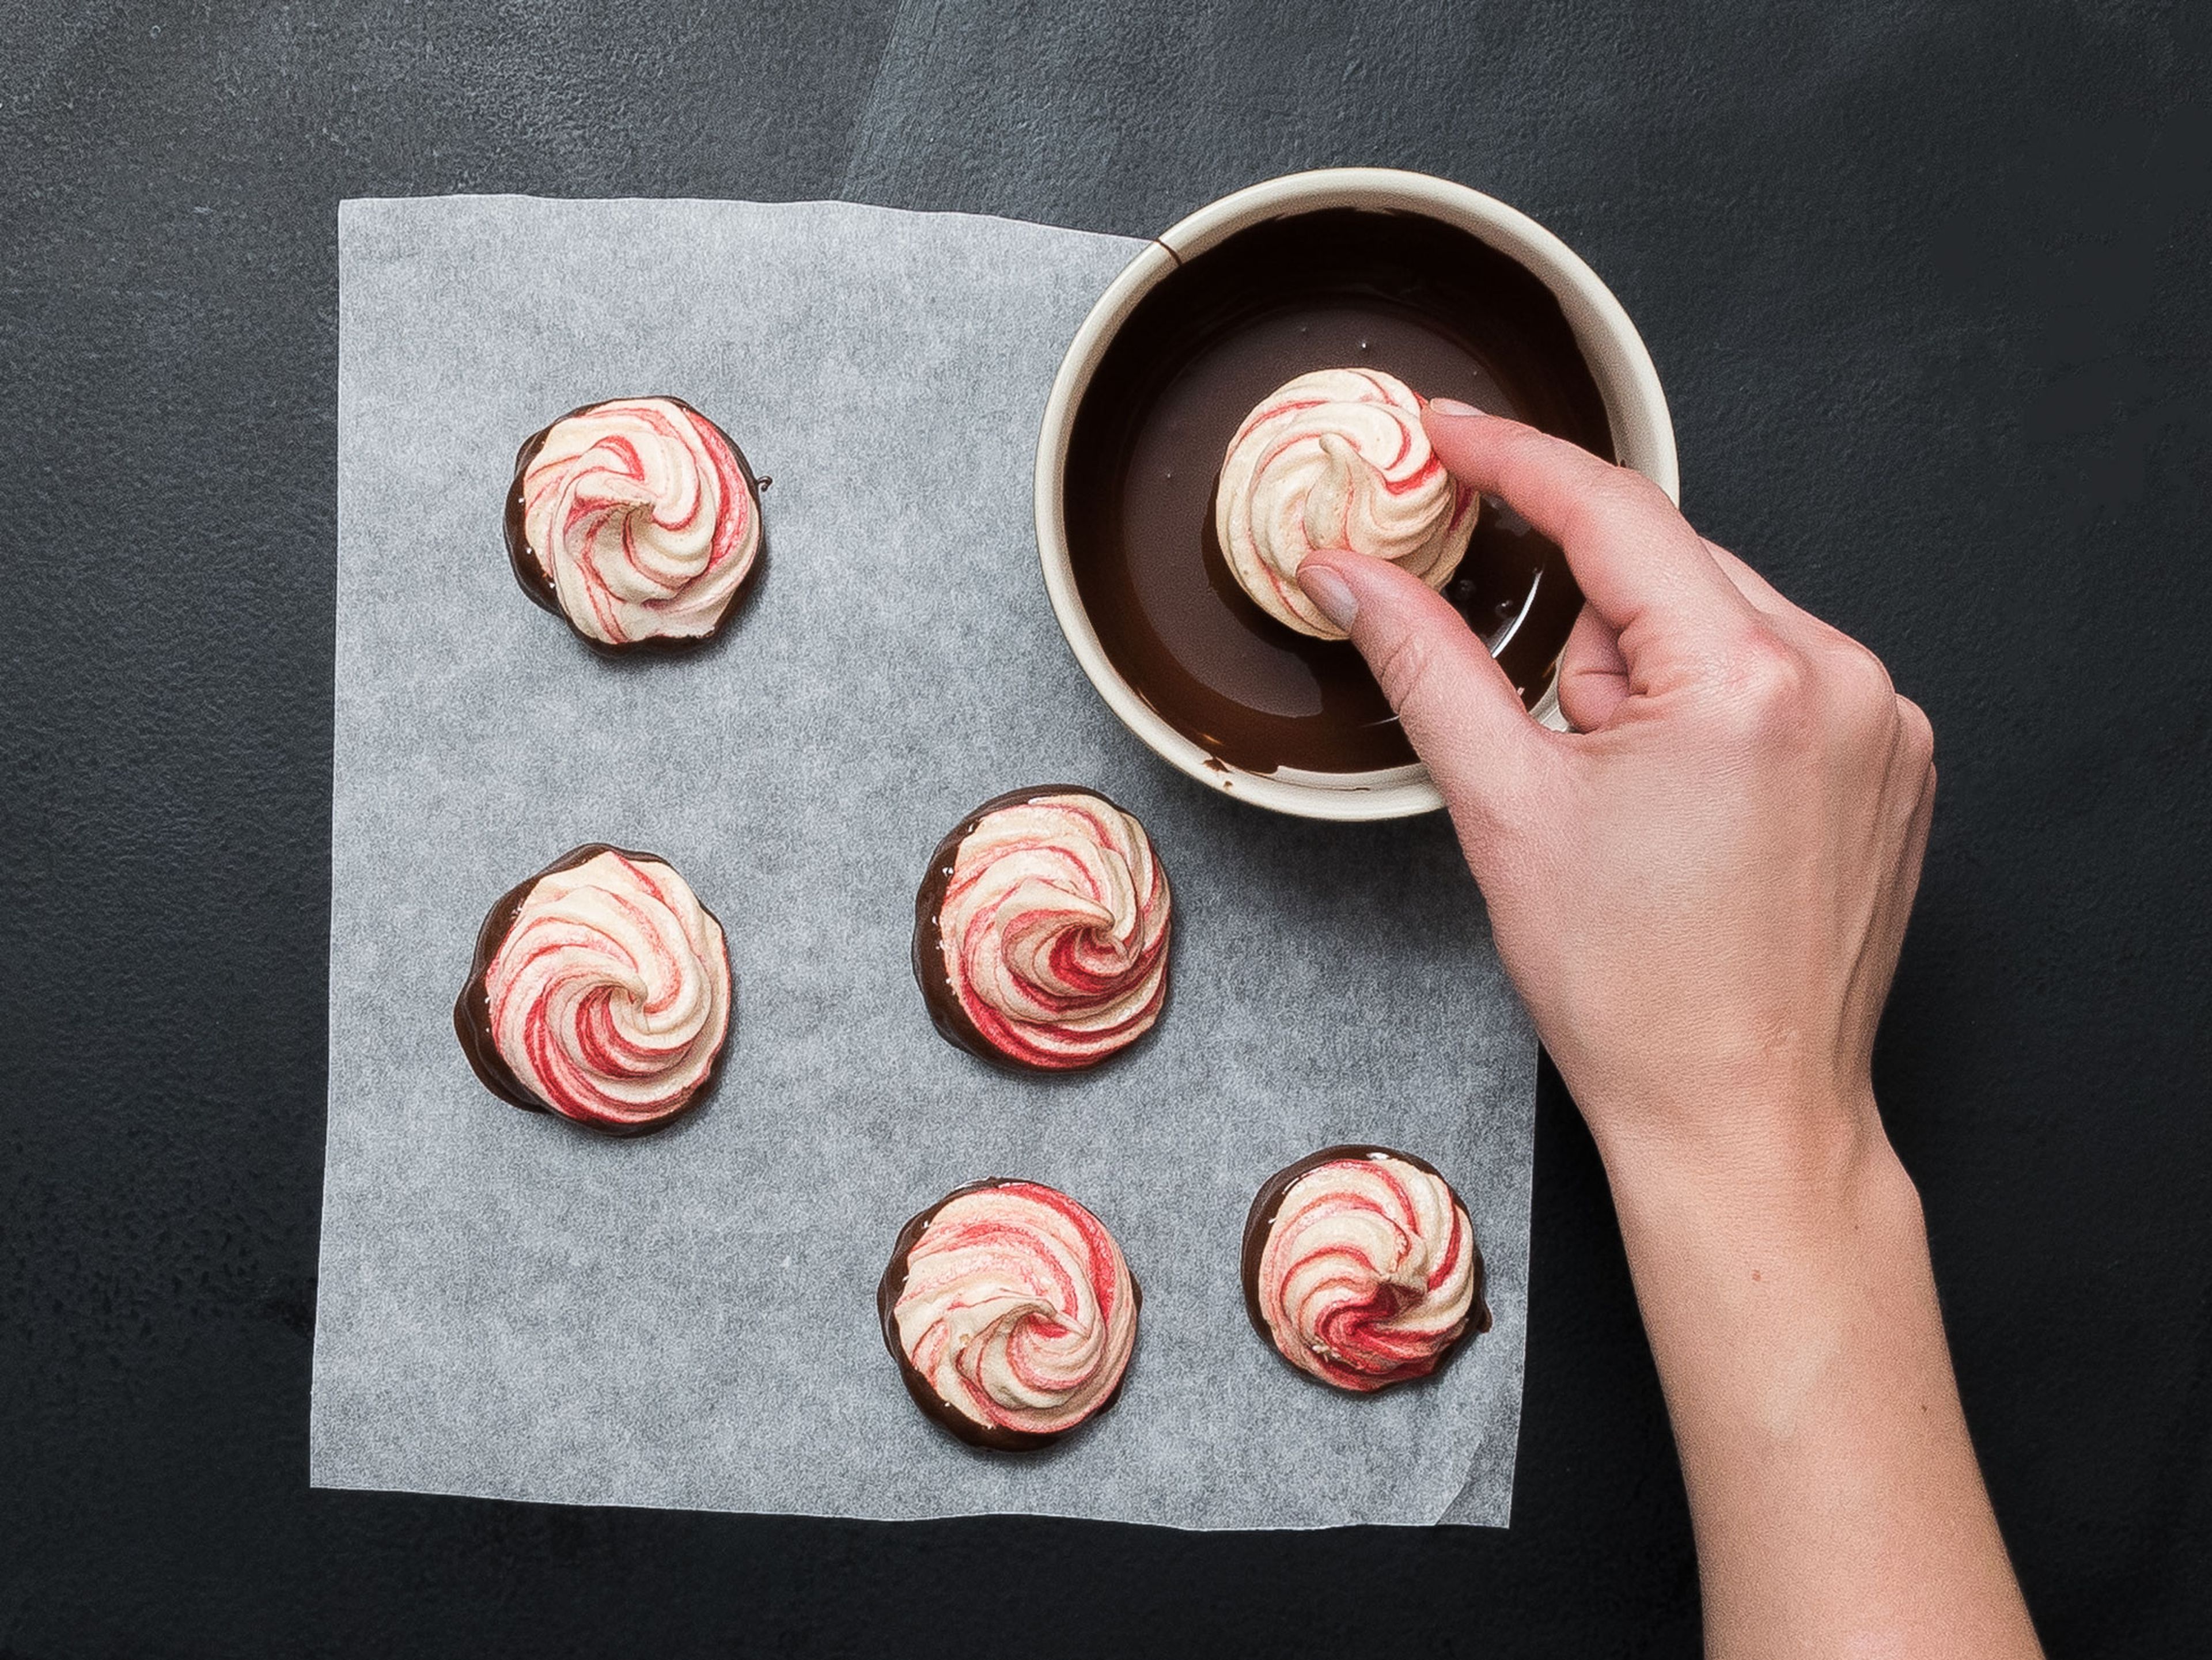 Meanwhile, melt the chocolate in a heatproof bowl set over a pot filled with simmering water. Dip the bottoms of the cooled meringues in chocolate, and leave to set on a piece of parchment paper. Enjoy!